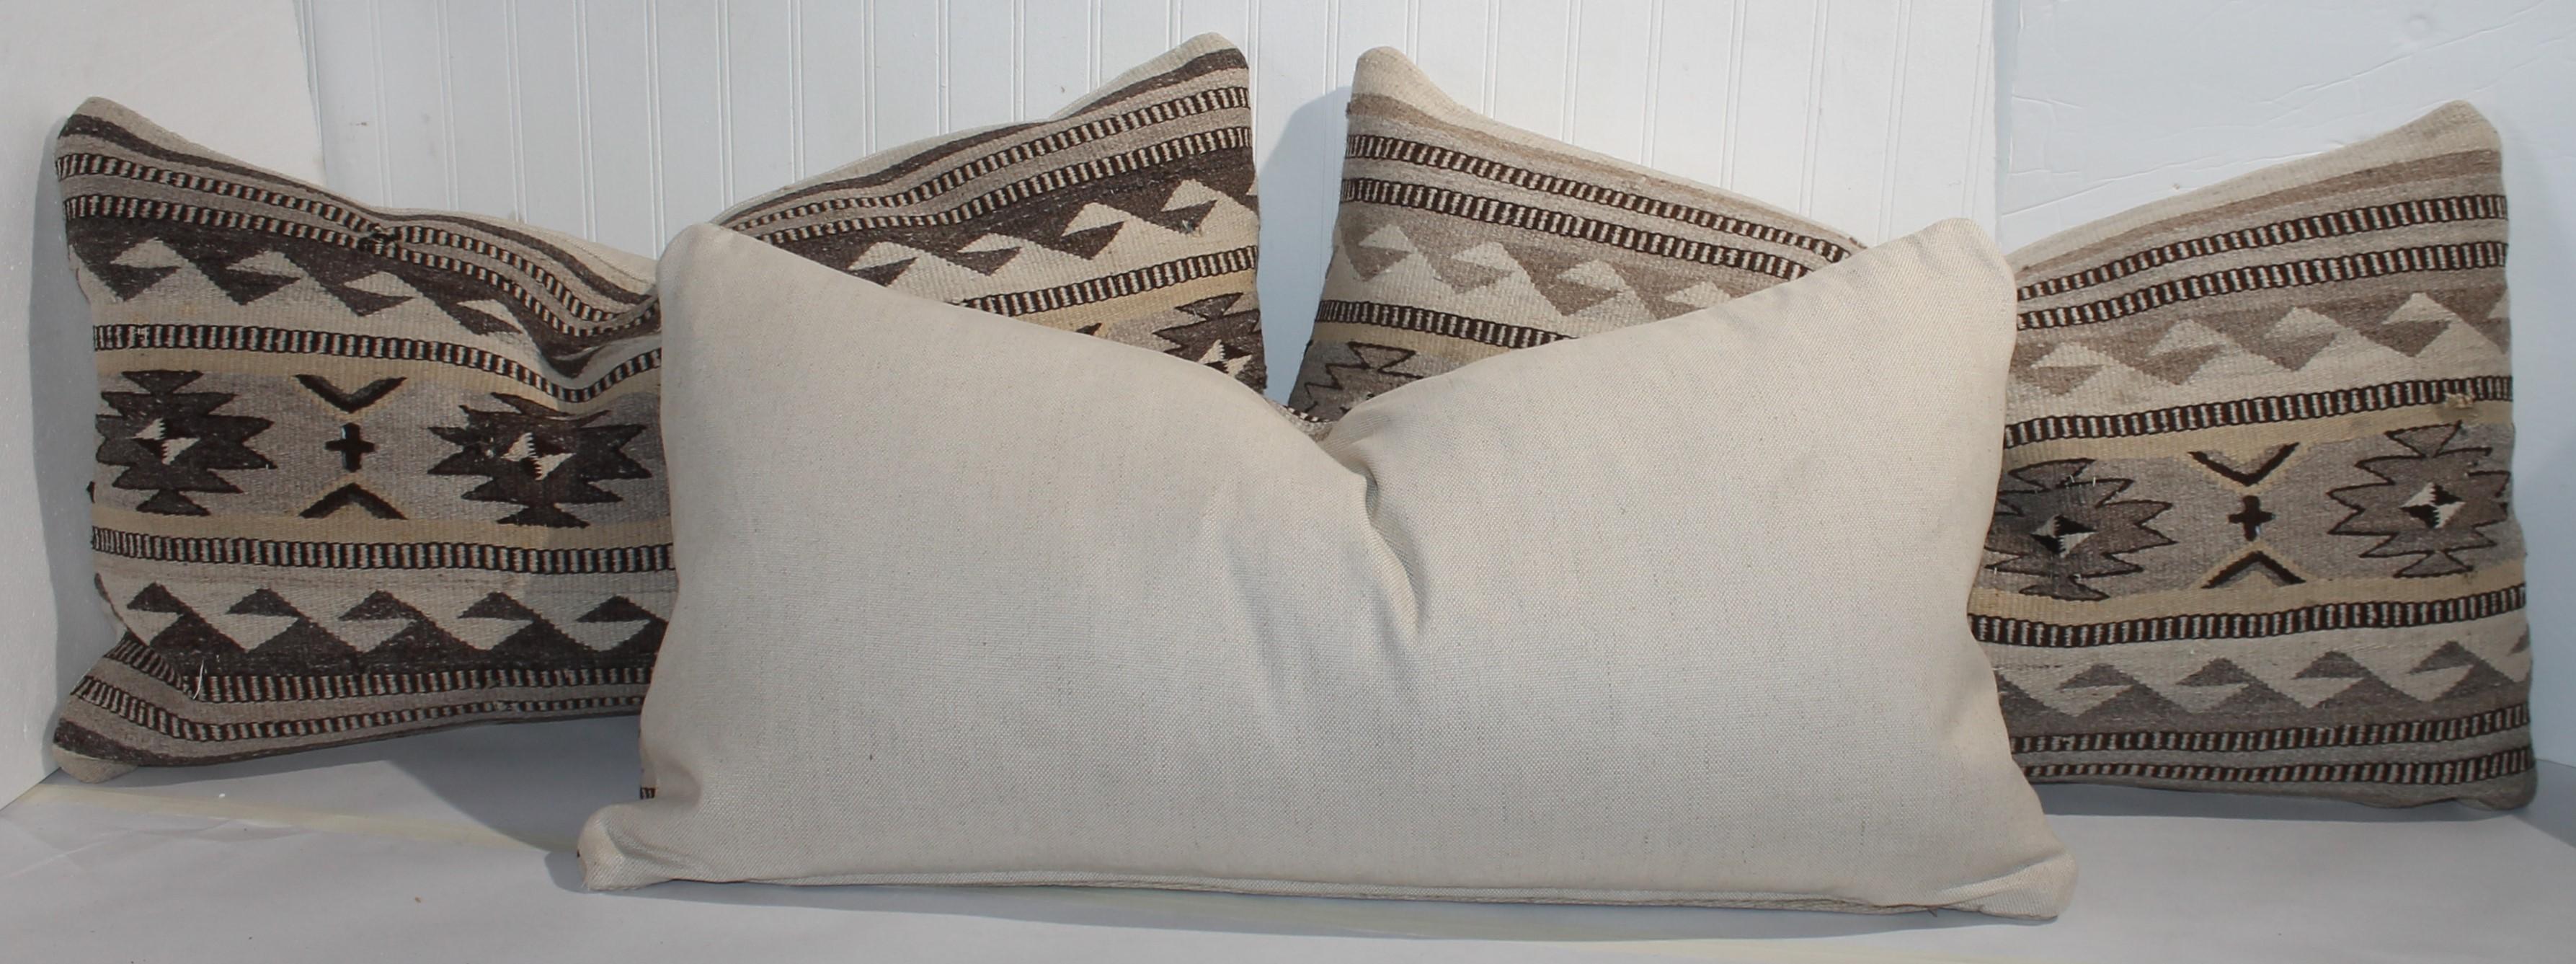 These fine weaving pillows are made in Mexico to look like American Navajo Weaving Pillows and are in very good condition. Can be sold individually @ 895.00 each or as a collection of three for 1895.00 for the group.